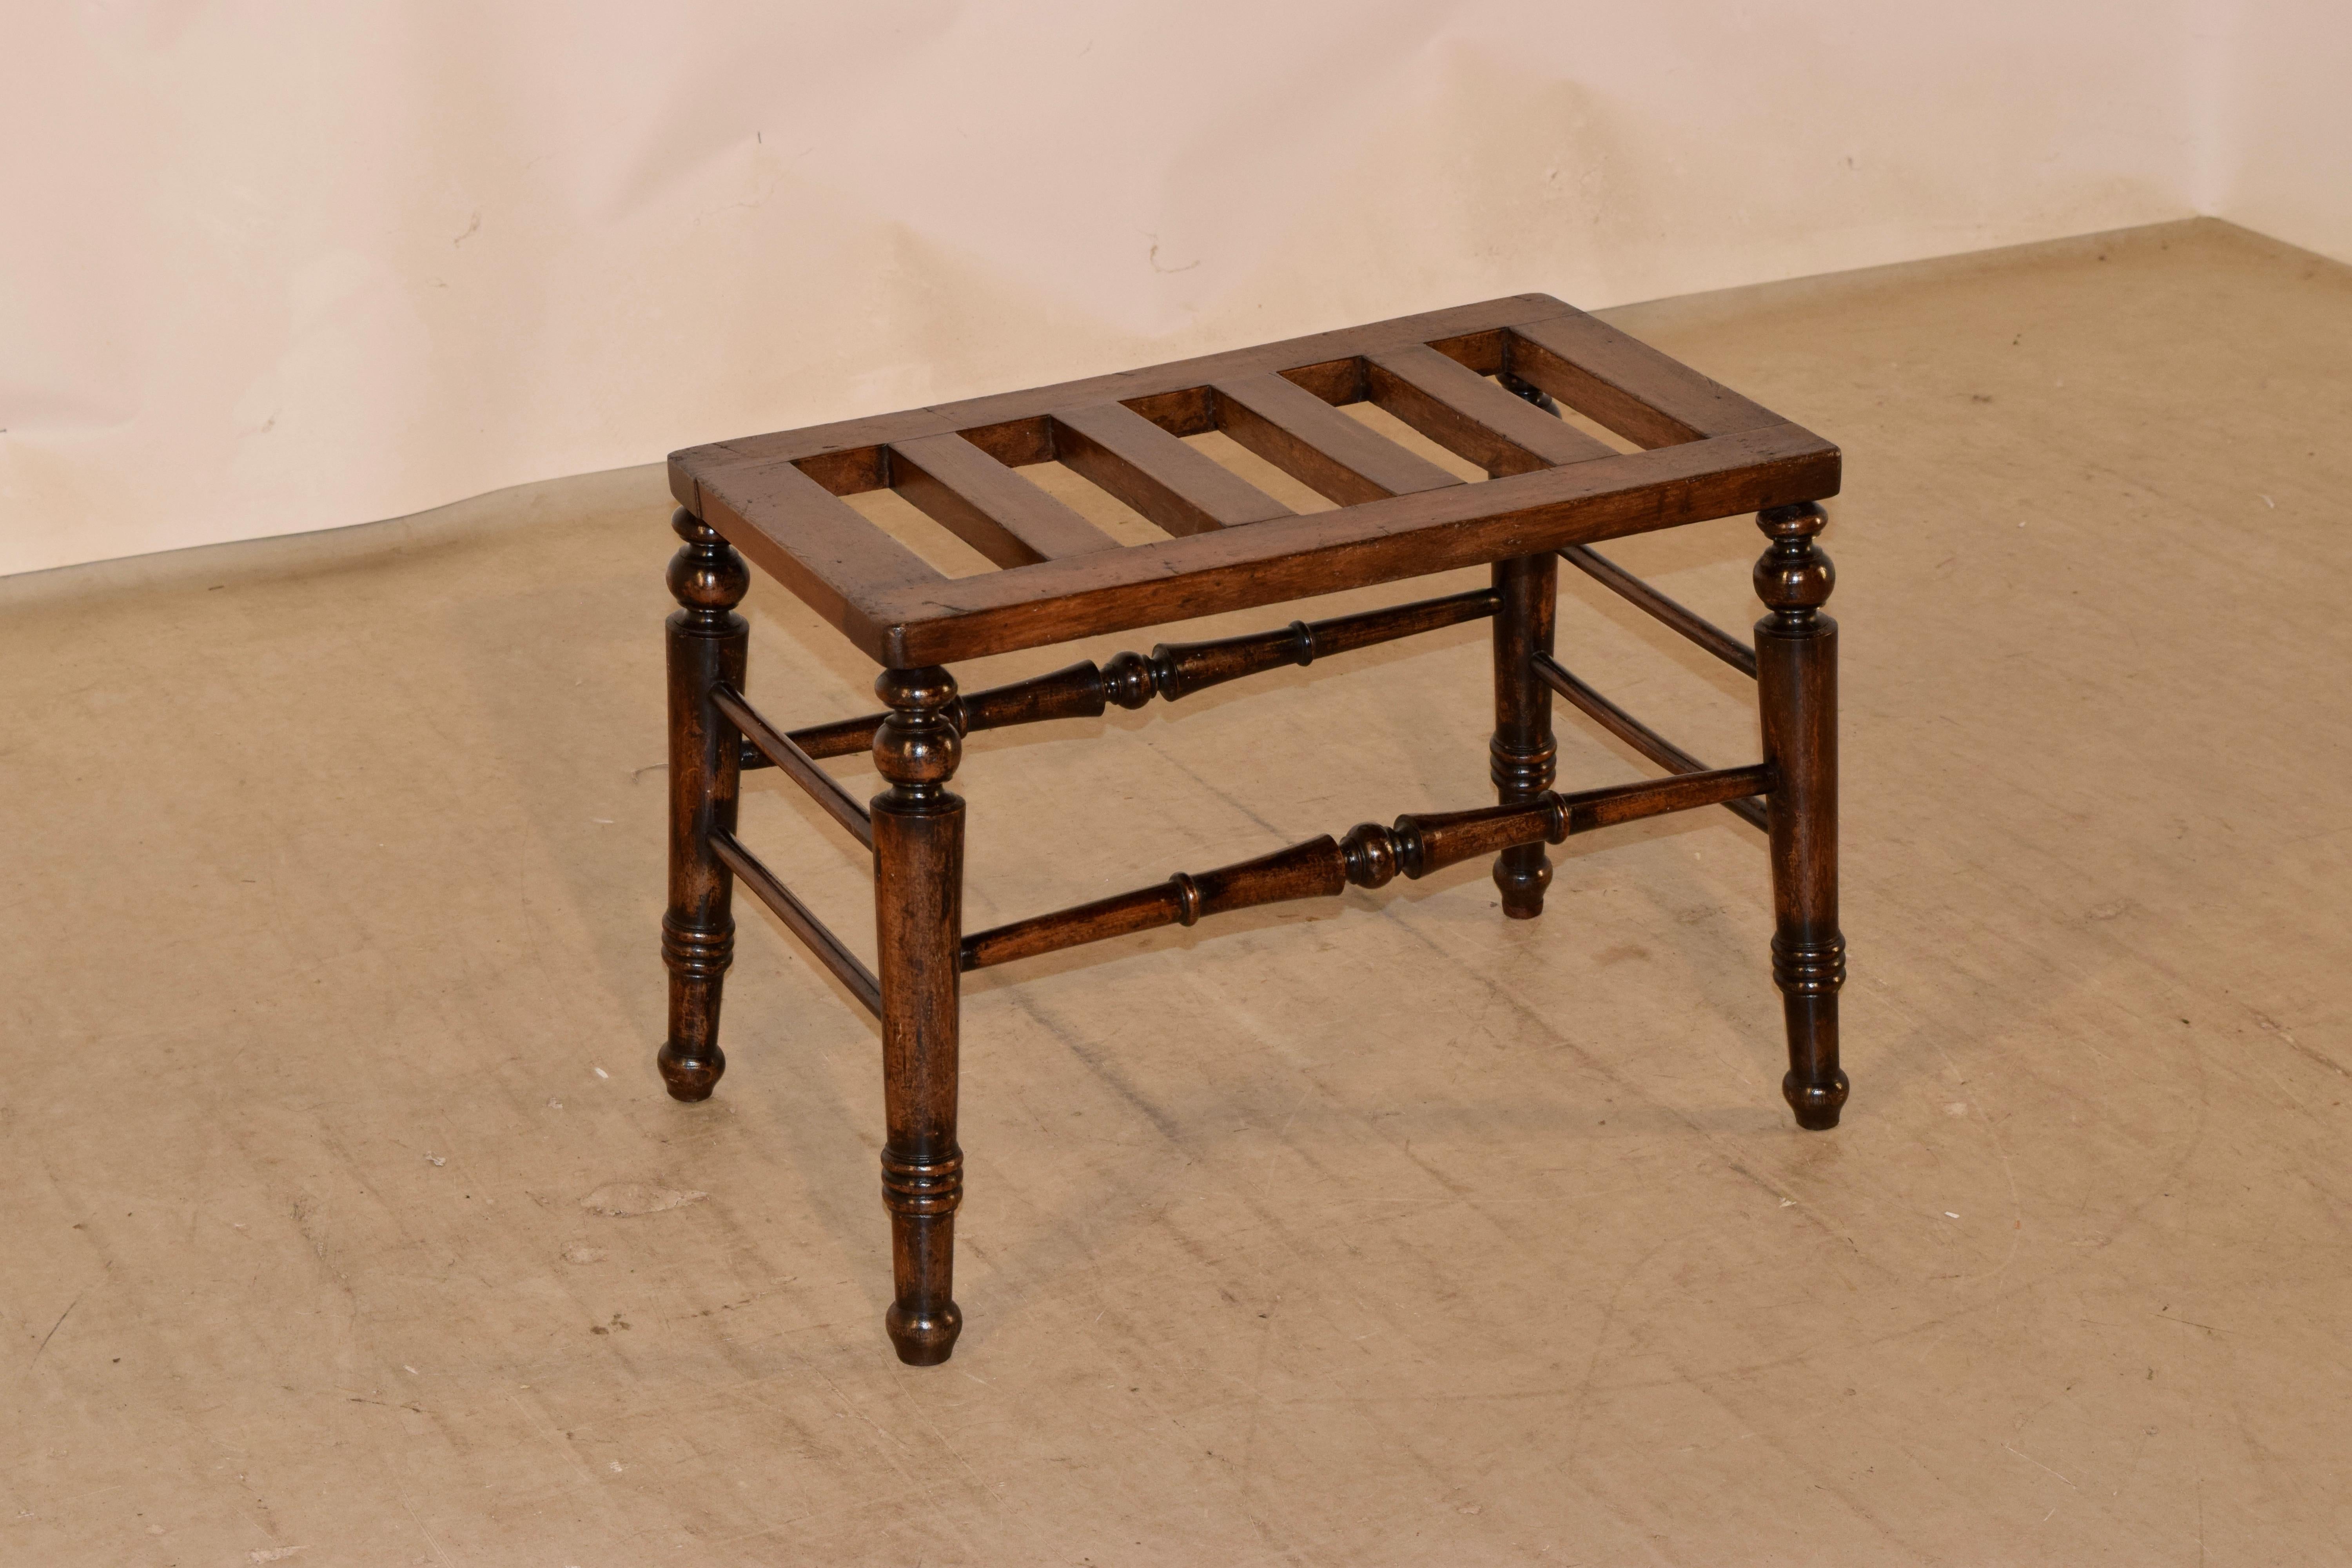 19th century mahogany luggage stand from England with a slatted top supported on hand turned splayed legs, joined by turned stretchers.